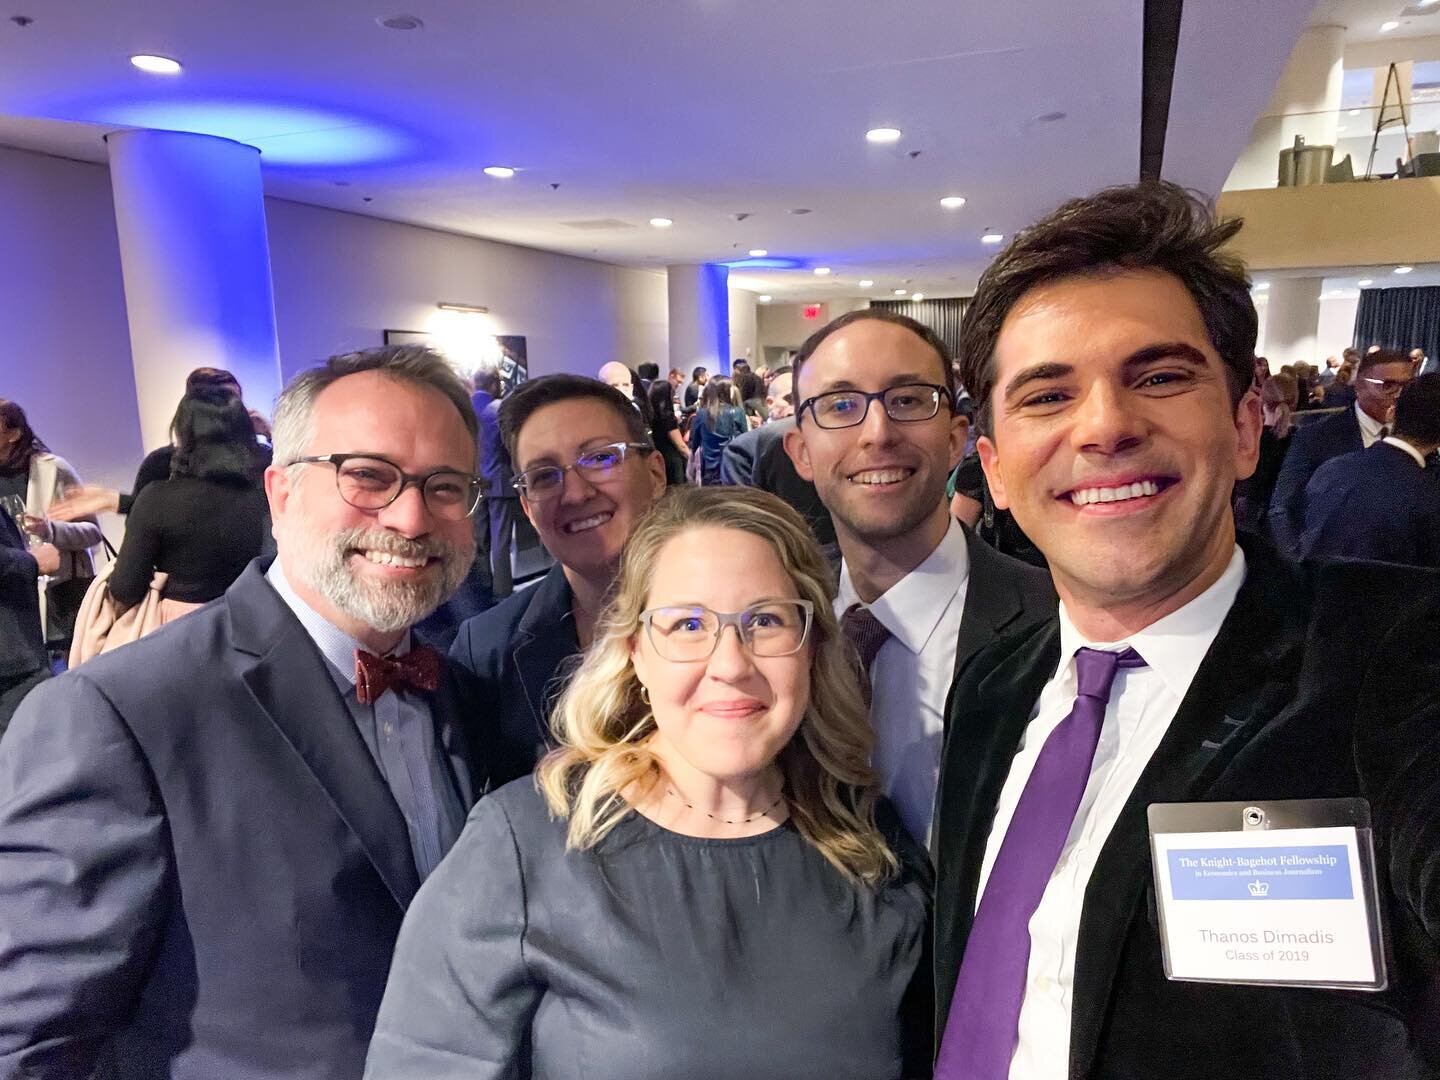 A night dedicated in celebrating the accomplishments of our family at Knight-Bagehot Fellowship Program of Columbia Journalism School in NYC. @columbiajournalism #columbiajournalism